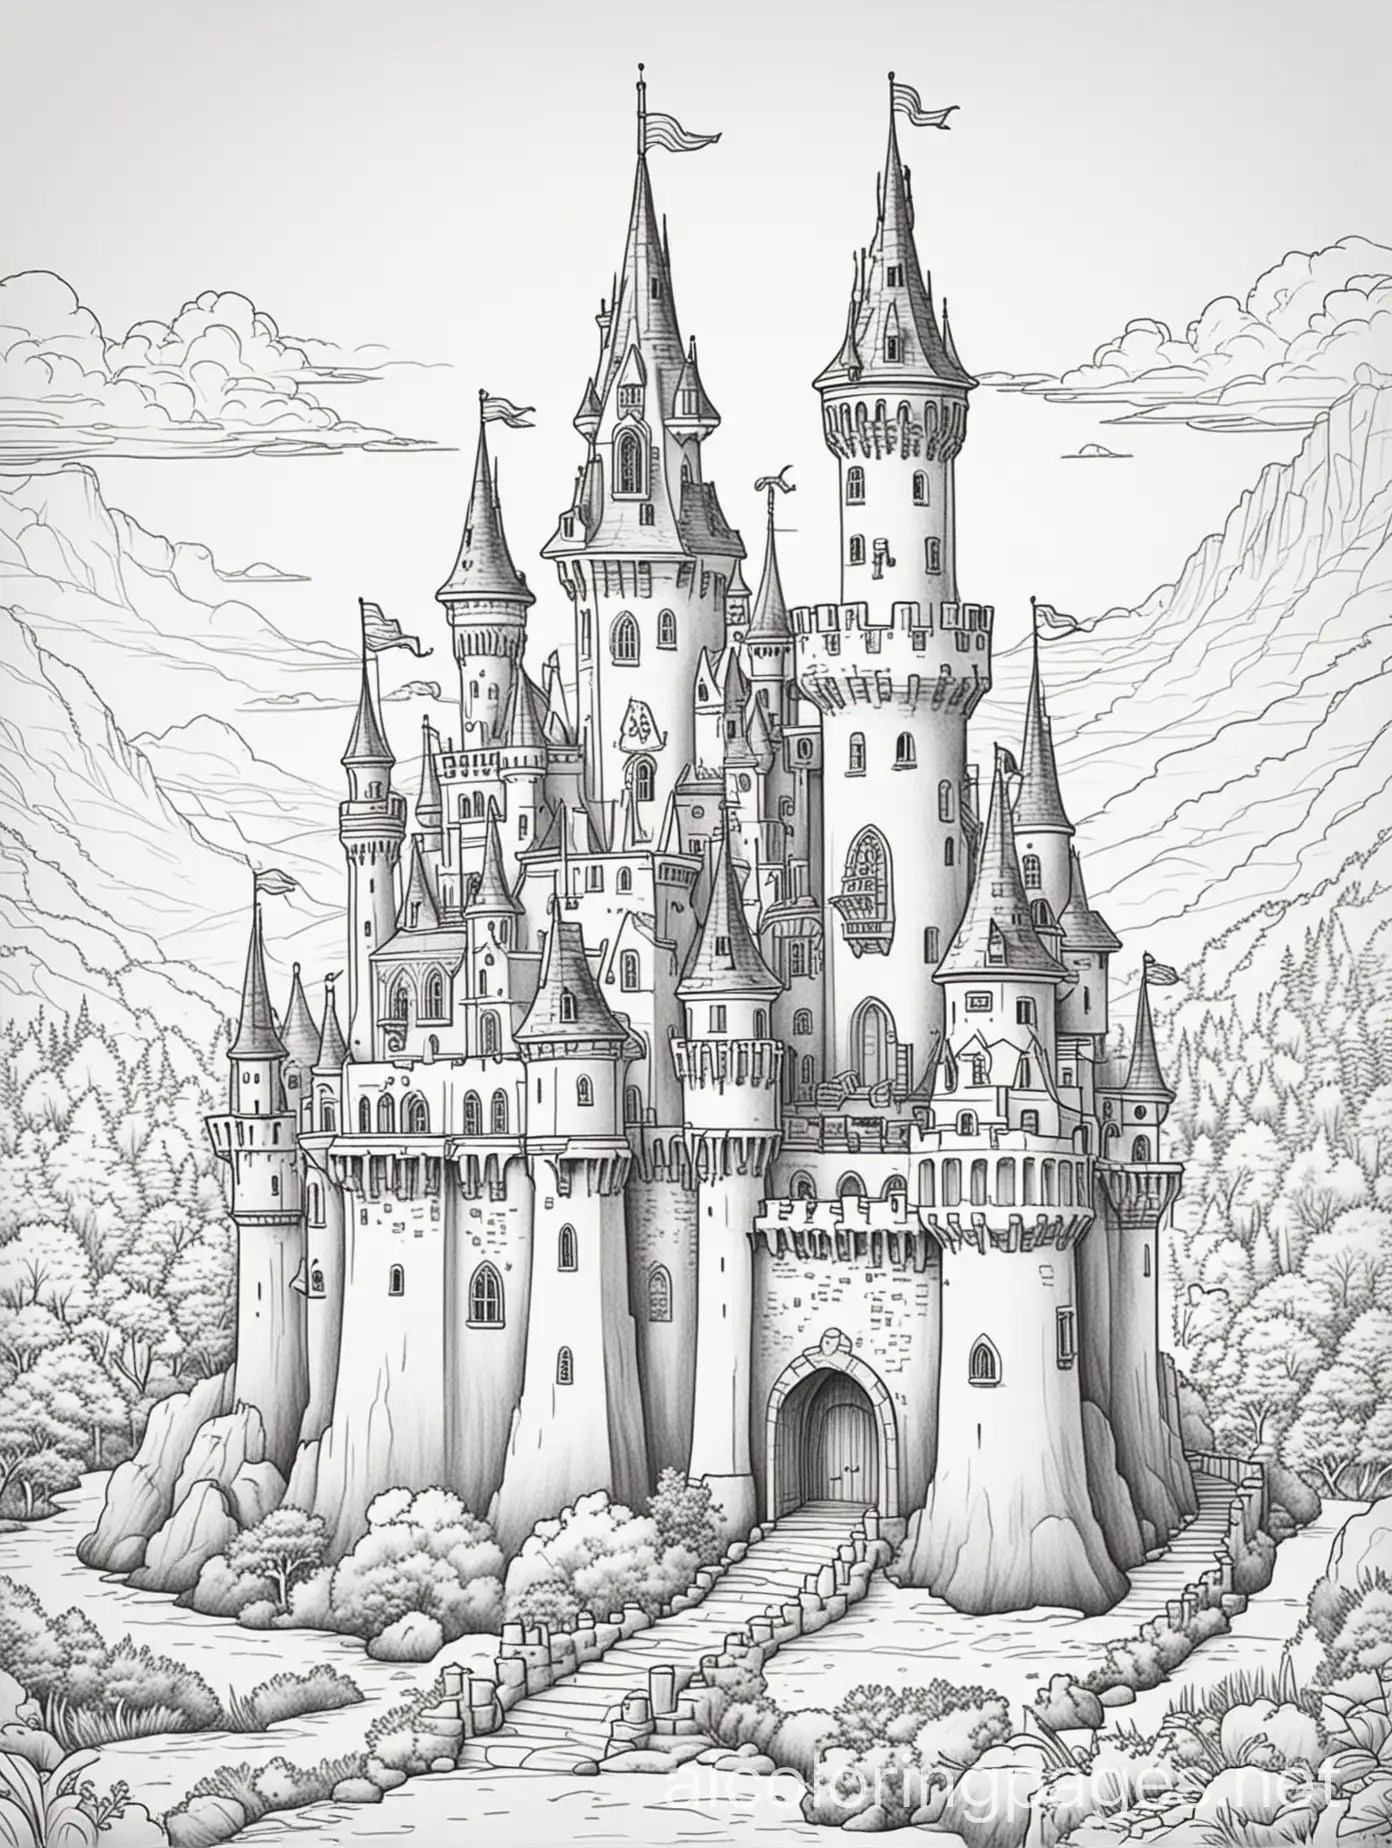 fairy tale castle, coloring page, black and white, line drawing, ample white space, no shading, Coloring Page, black and white, line art, white background, Simplicity, Ample White Space. The background of the coloring page is plain white to make it easy for young children to color within the lines. The outlines of all the subjects are easy to distinguish, making it simple for kids to color without too much difficulty, Coloring Page, black and white, line art, white background, Simplicity, Ample White Space. The background of the coloring page is plain white to make it easy for young children to color within the lines. The outlines of all the subjects are easy to distinguish, making it simple for kids to color without too much difficulty